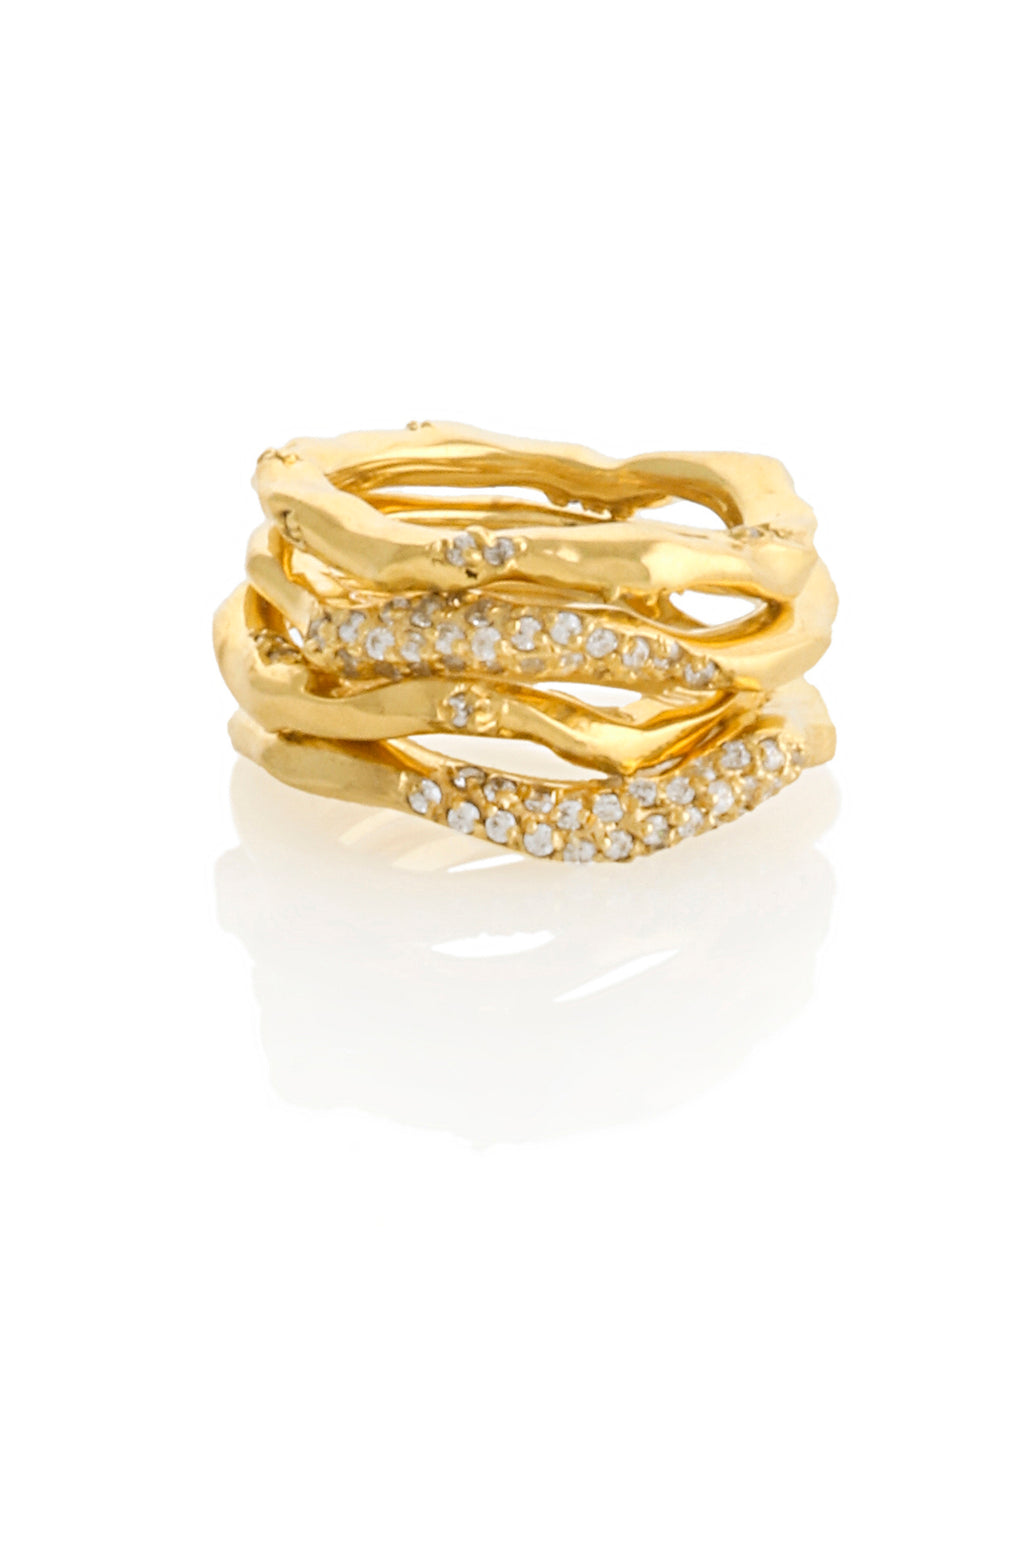 GOLD PLATED PAVE WAVES RINGS SET